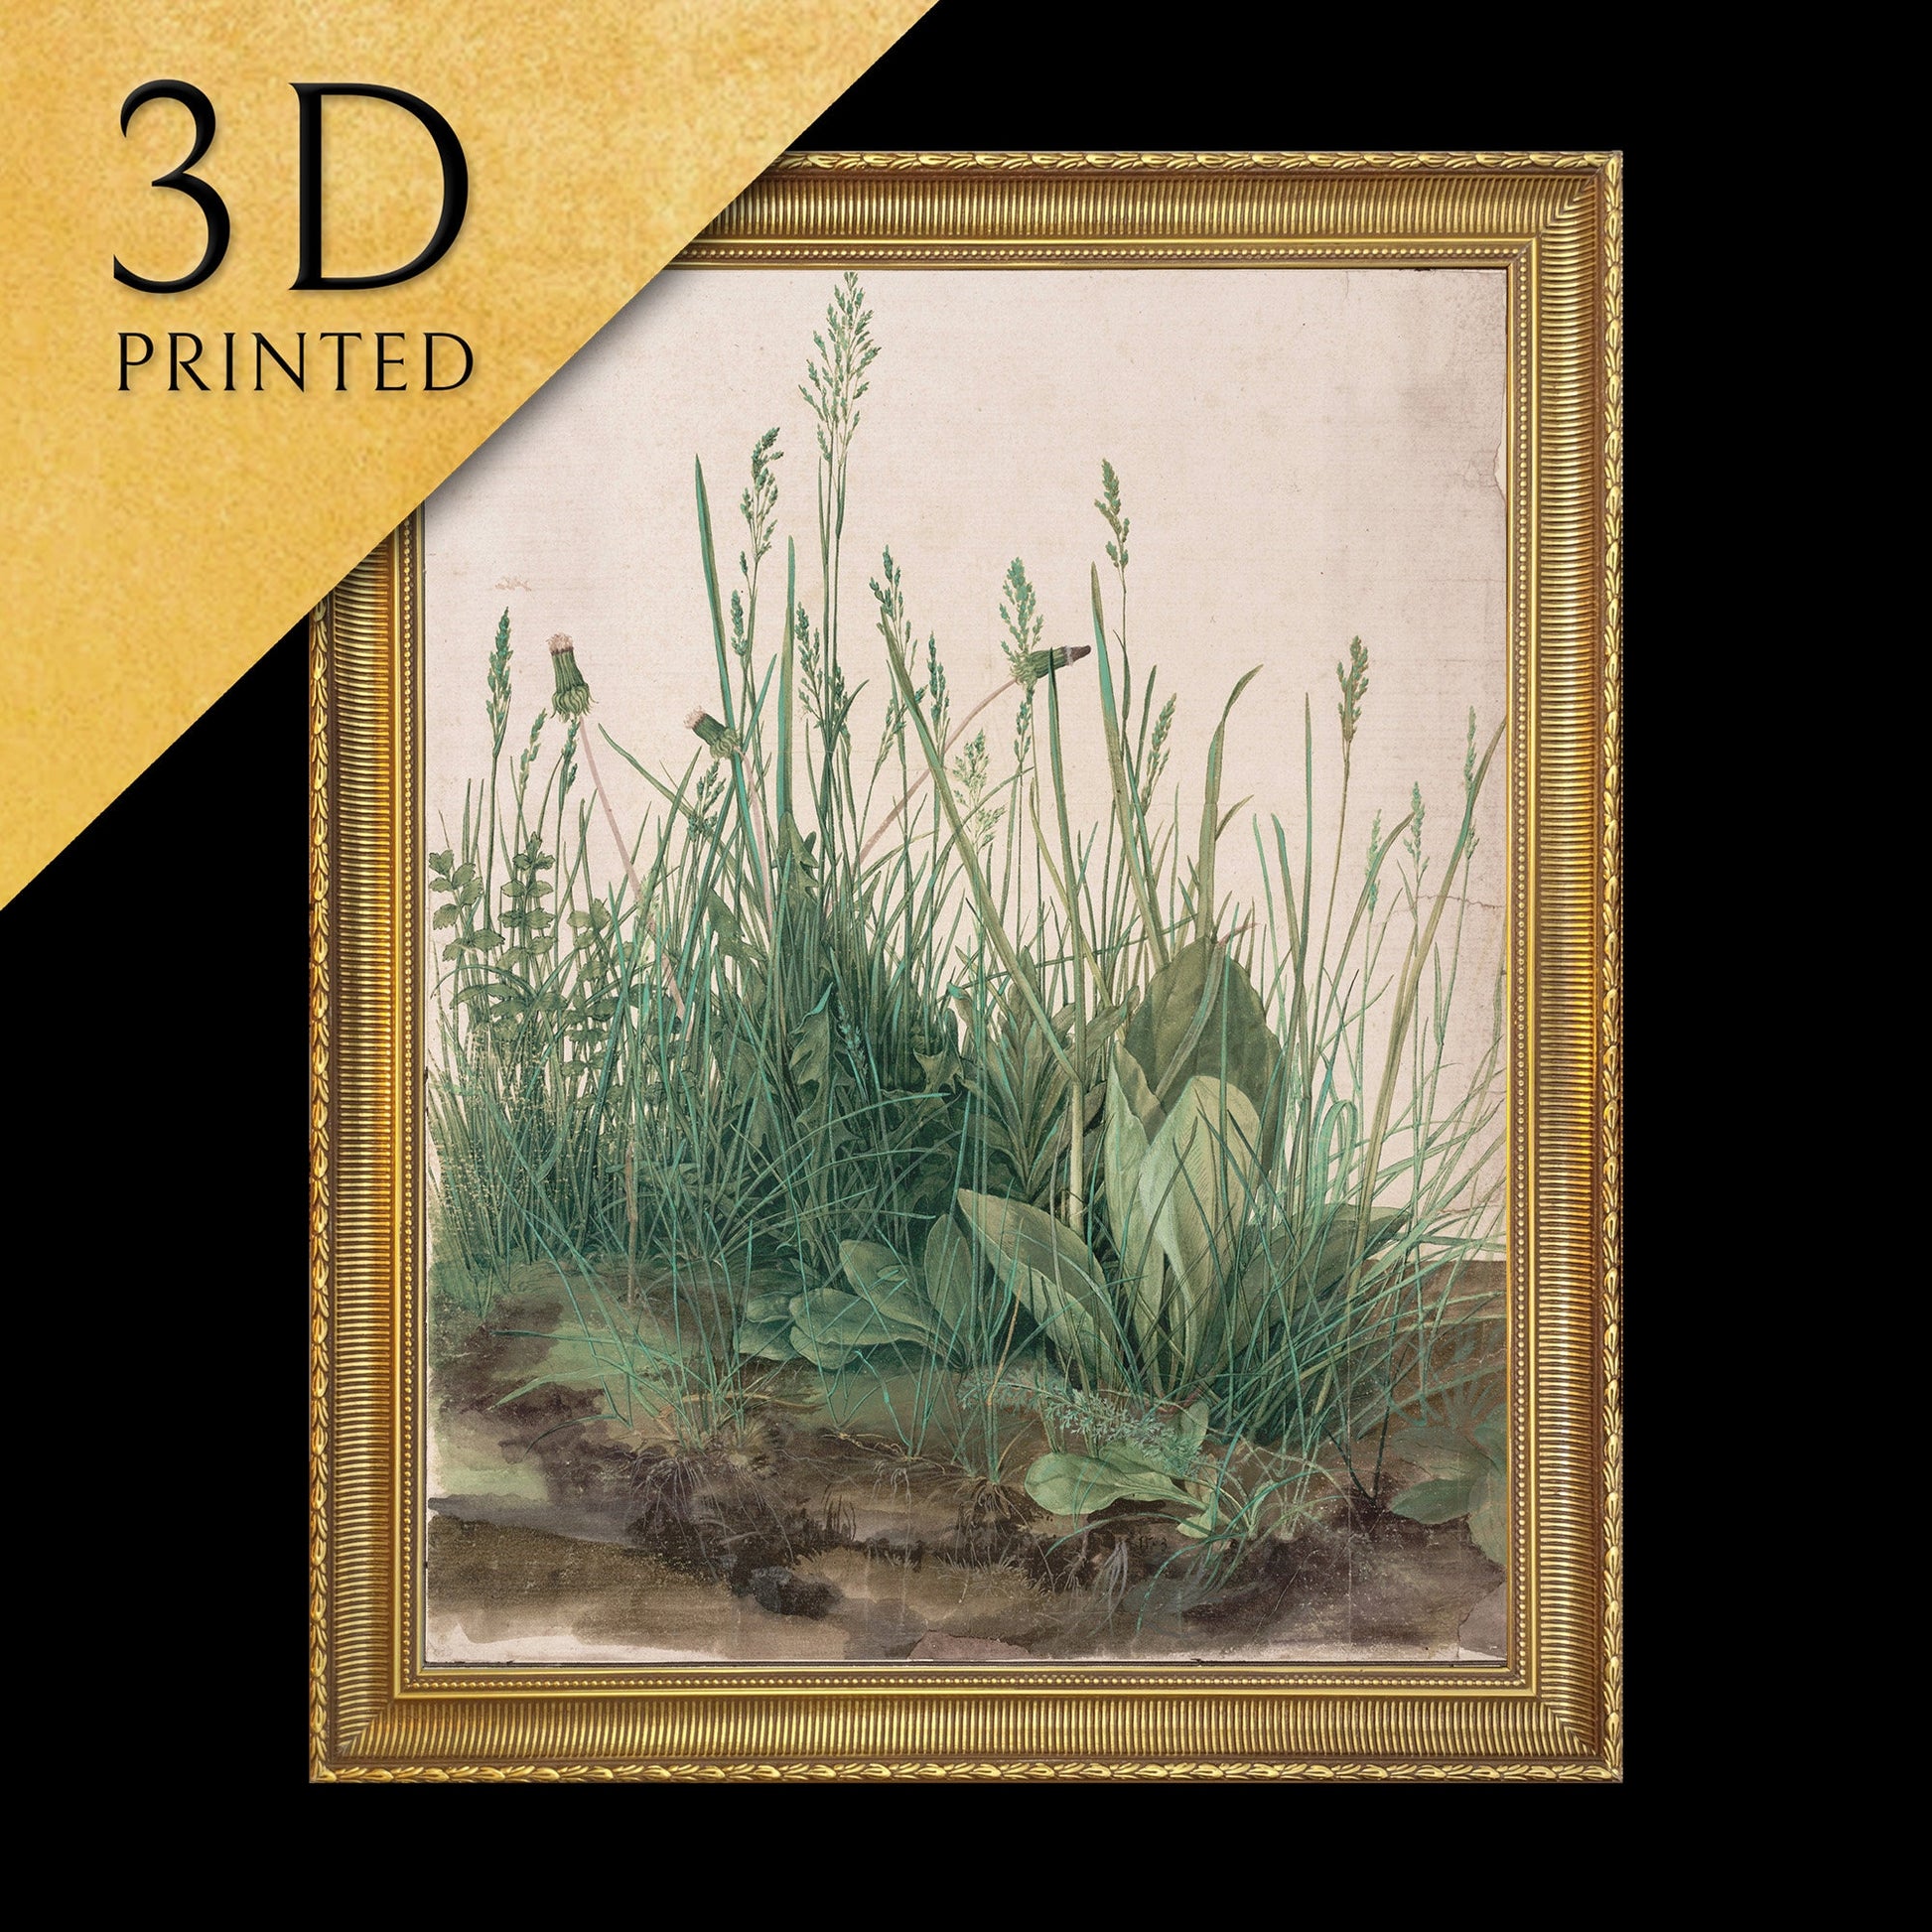 The Large Piece of Turf by Albrecht Dürer, 3d Printed with texture and brush strokes looks like original oil-painting, code:493